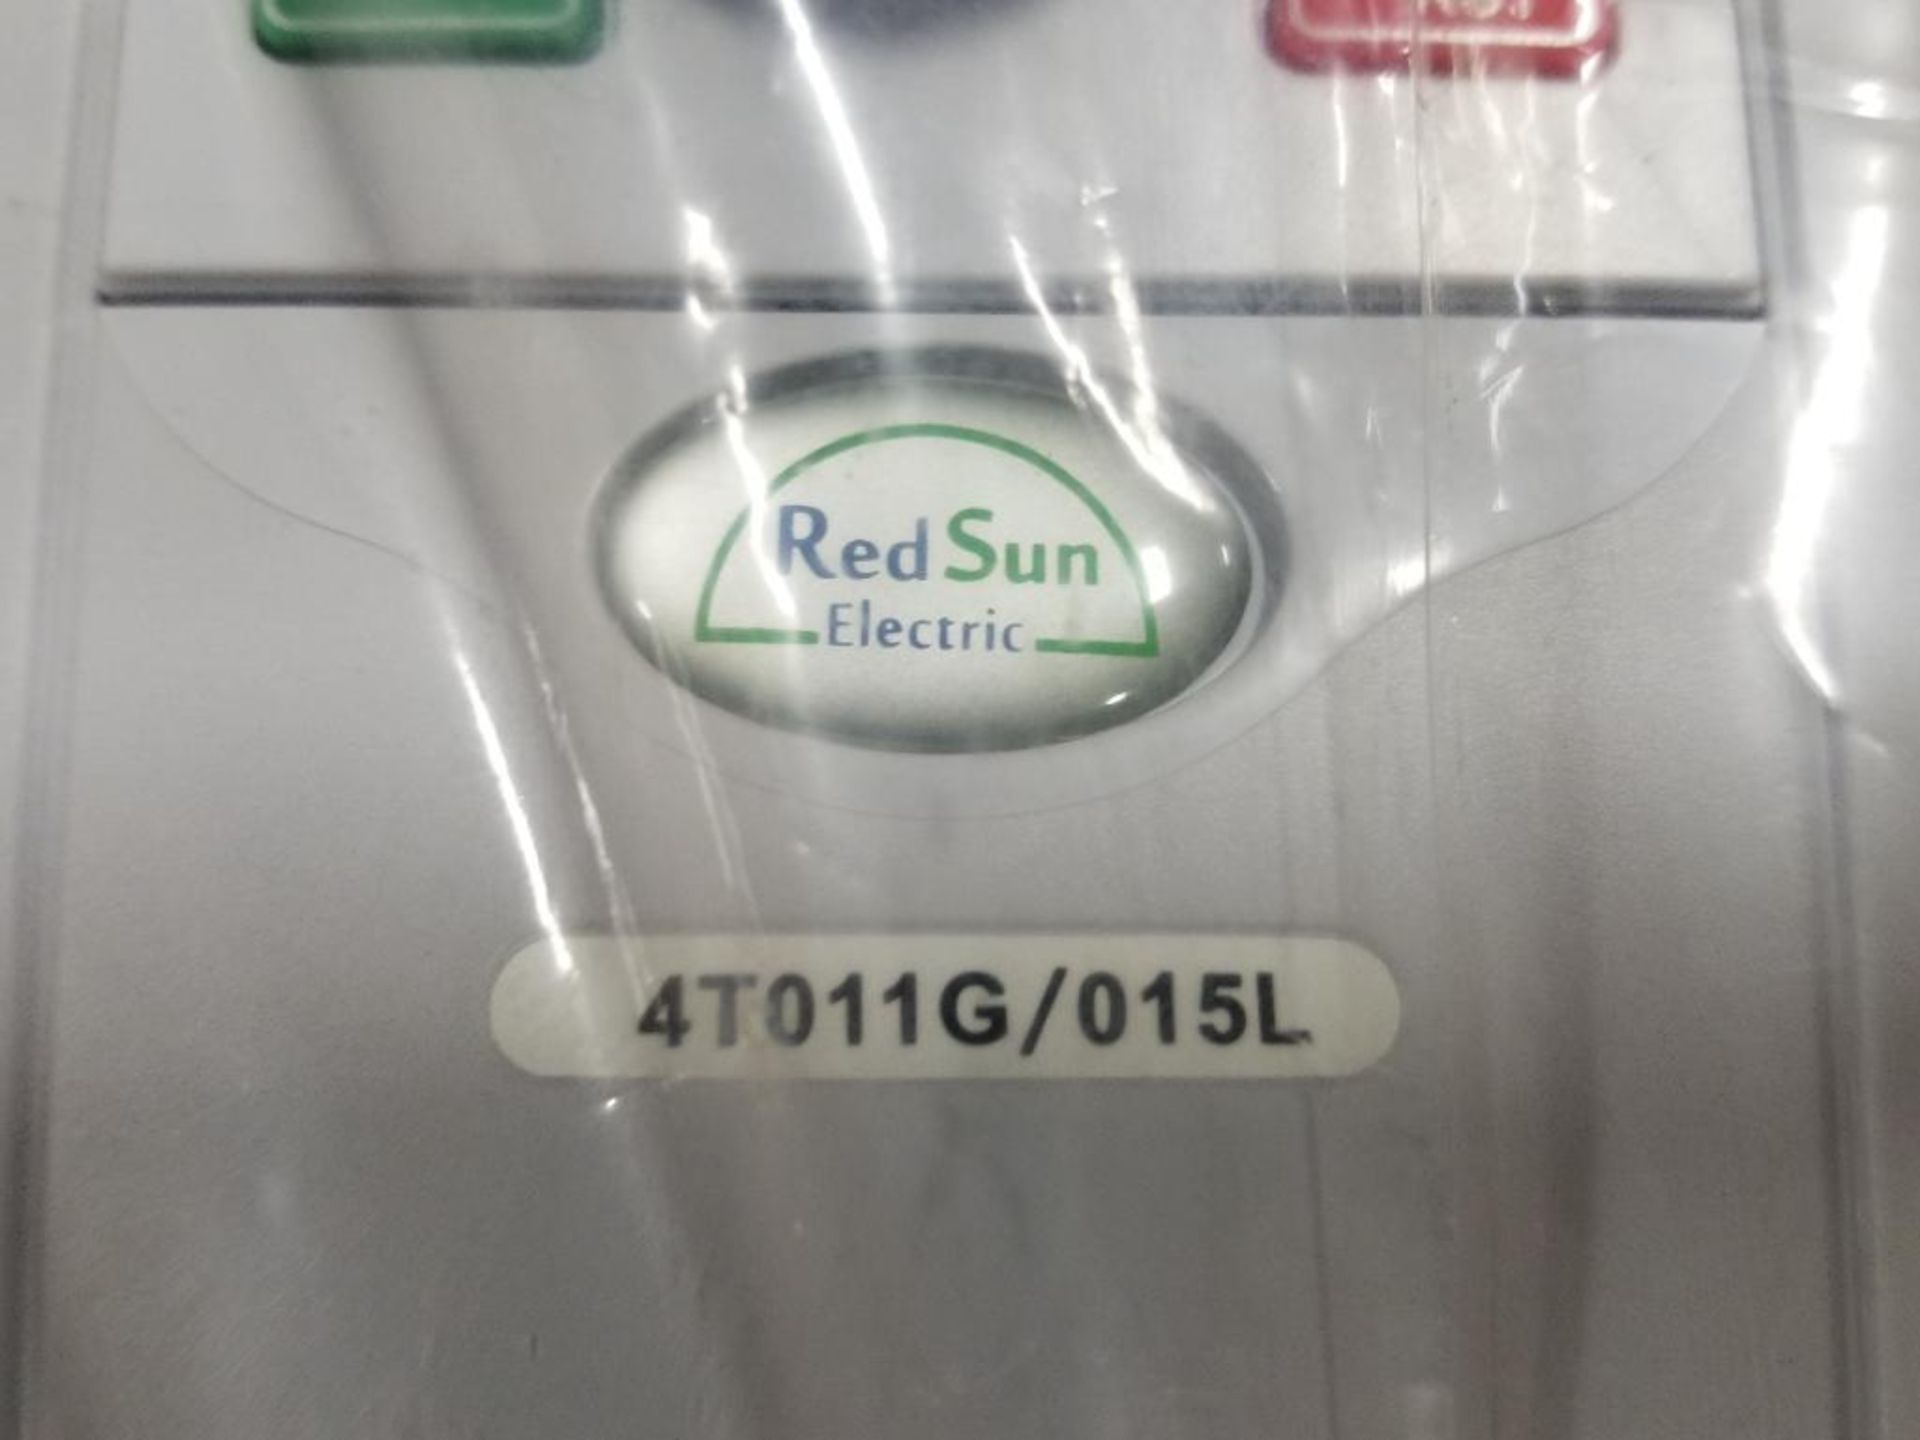 Red Sun Electric RSE360 inverter AC drive. RSE360-5T011G/015L. - Image 5 of 8